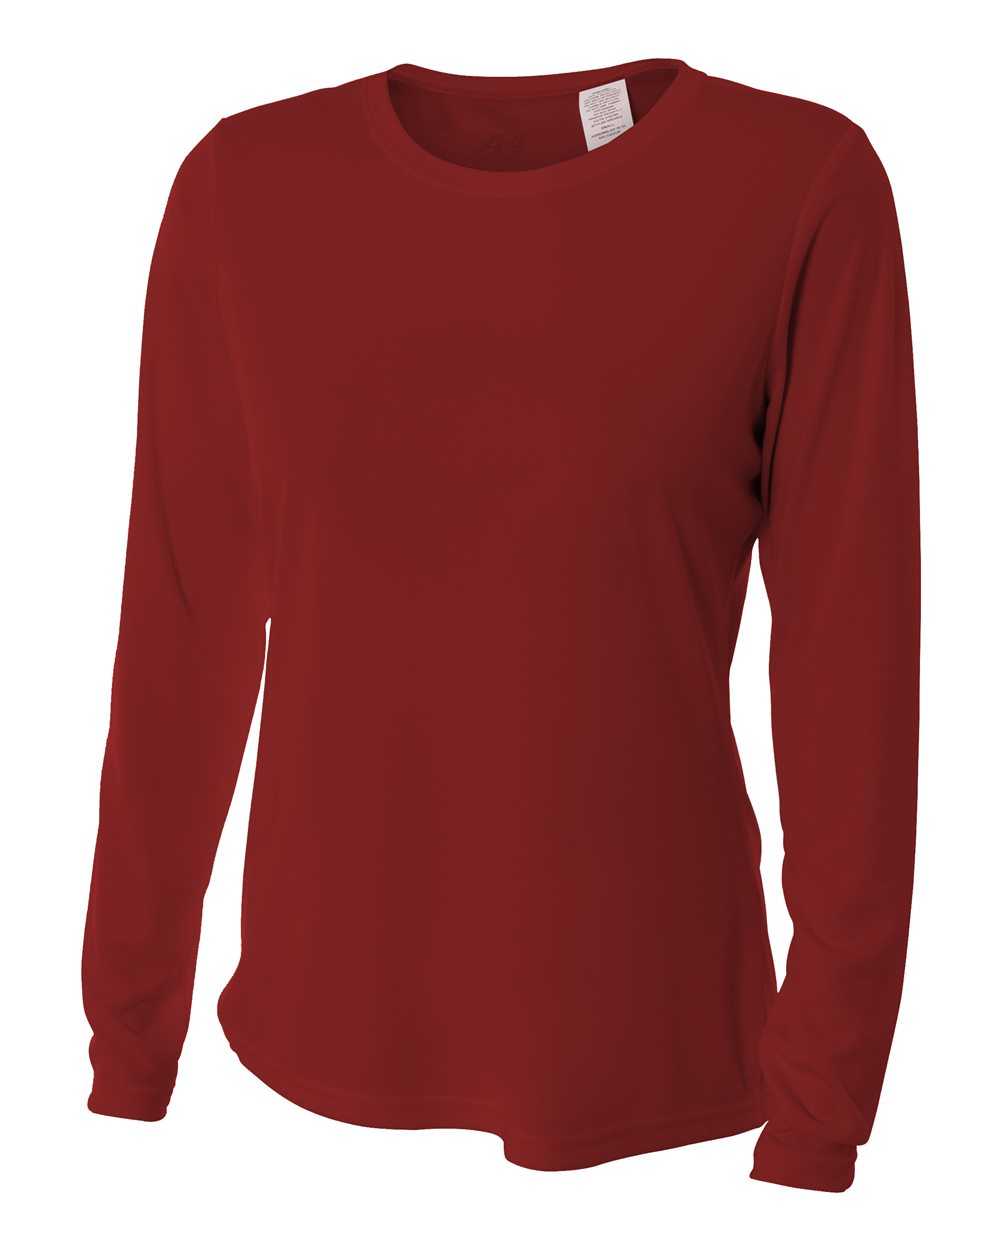 A4 NW3002 Women's Long Sleeve Performance Crew - Cardinal - HIT a Double